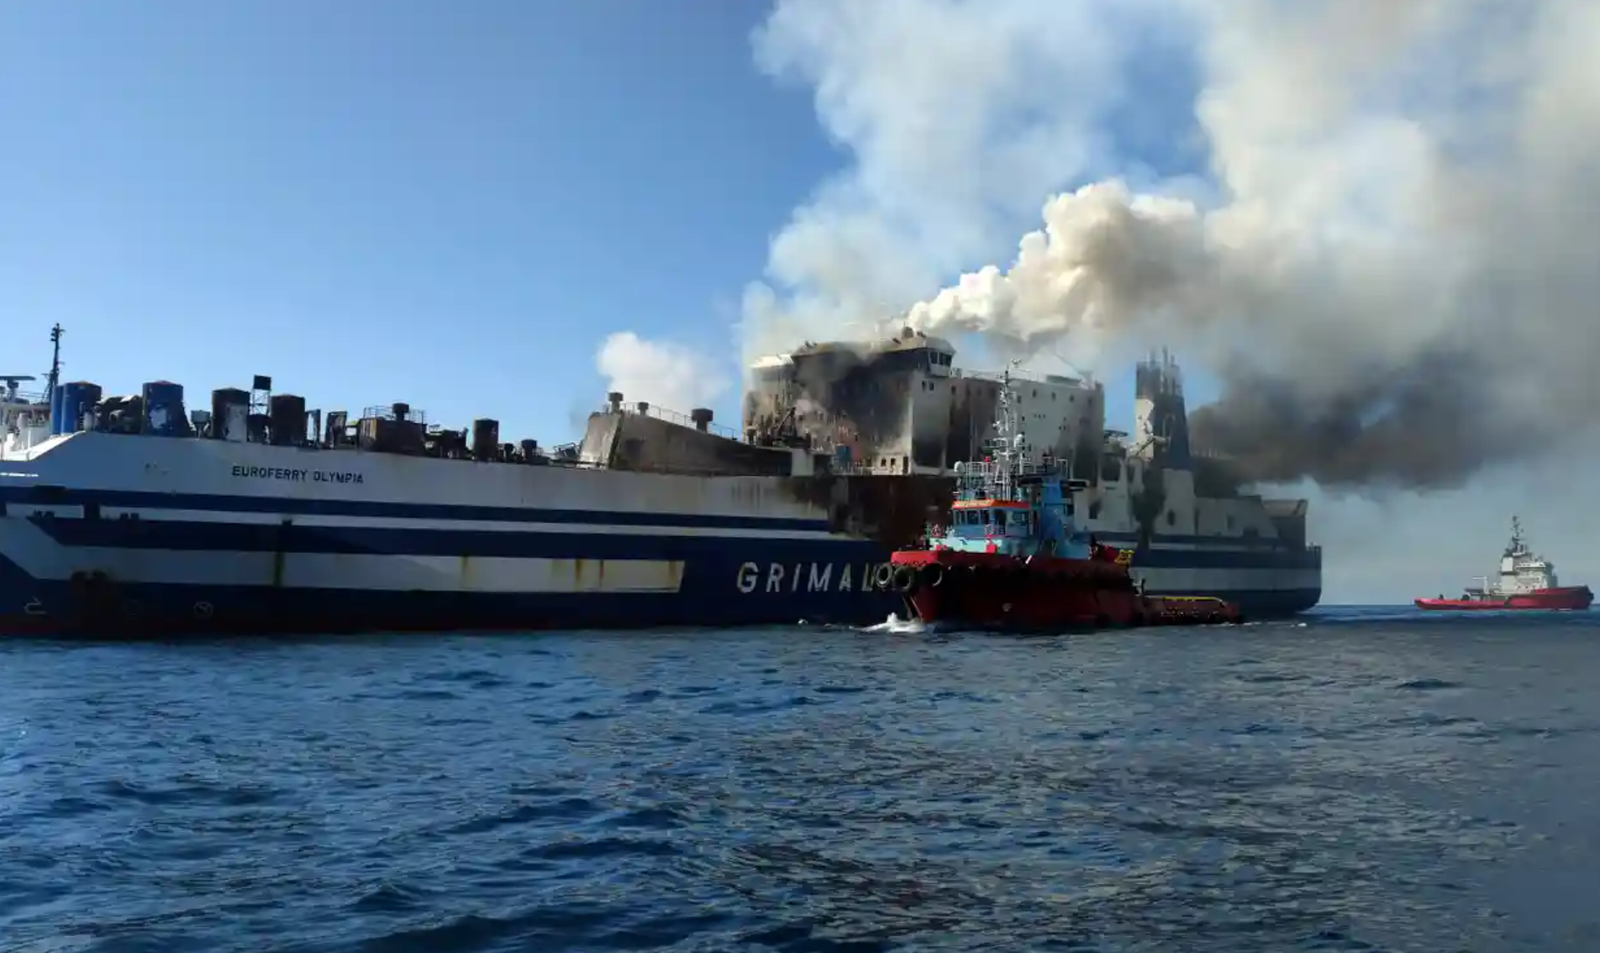 Flames And Controversy Spread On Euroferry Olympia - The Stork